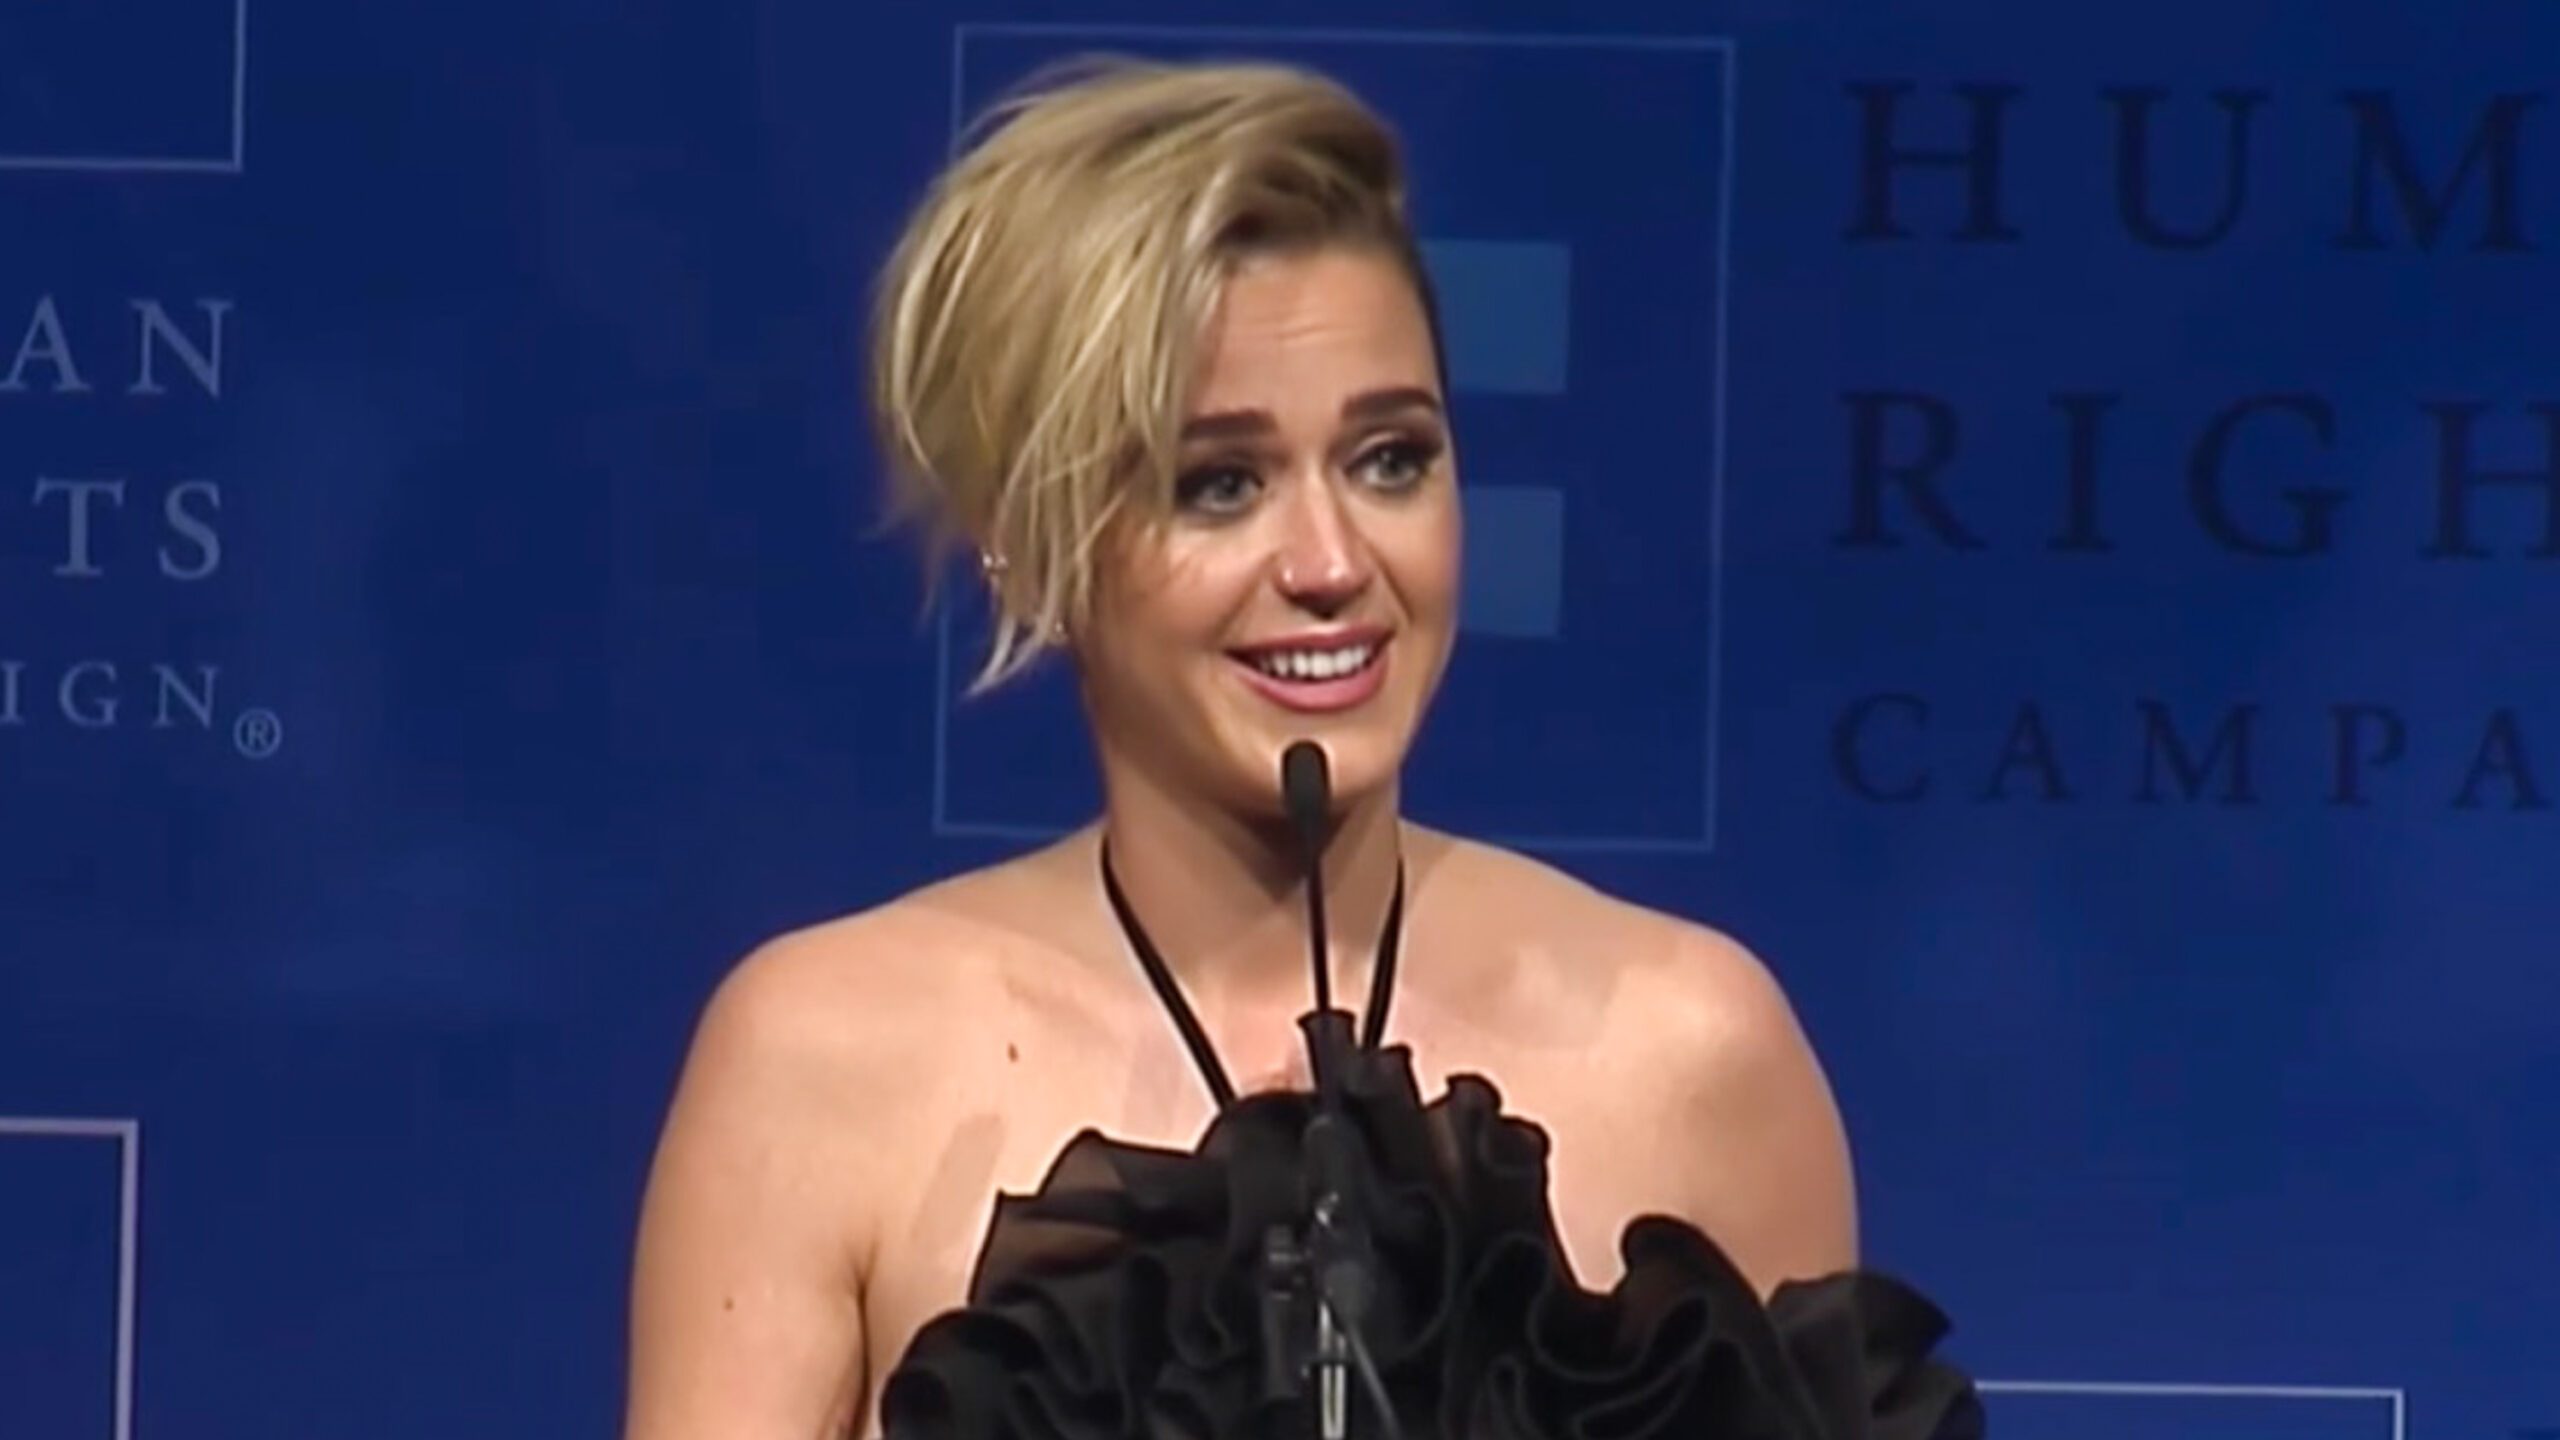 WATCH: Katy Perry calls herself proof of change on gay rights